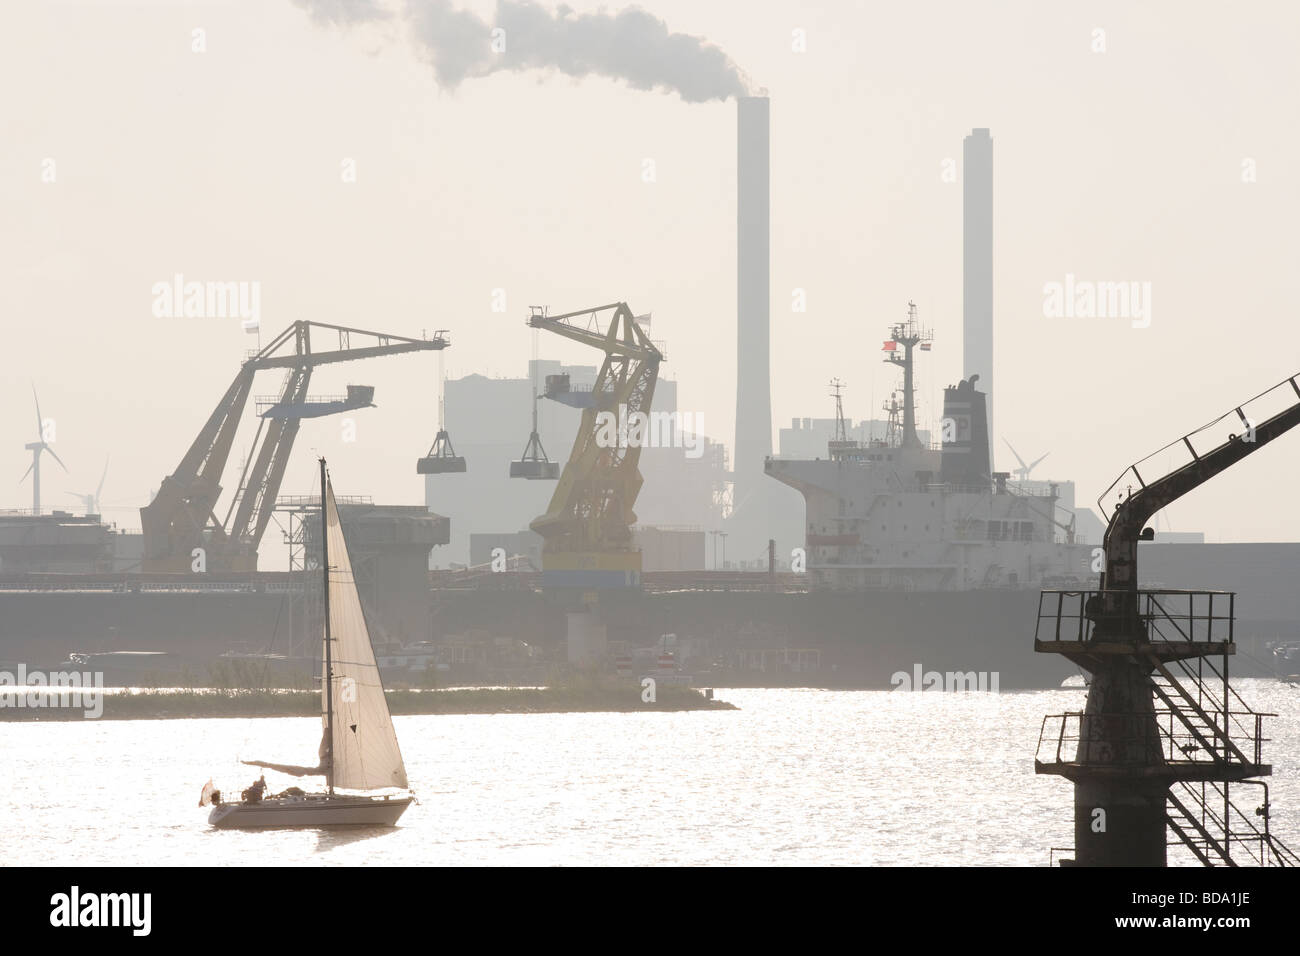 Amsterdam Harbor with loading docks, freighter, sailing ship and the Nuon Hemweg coal-fired and natural-gas fueled power plants. Stock Photo